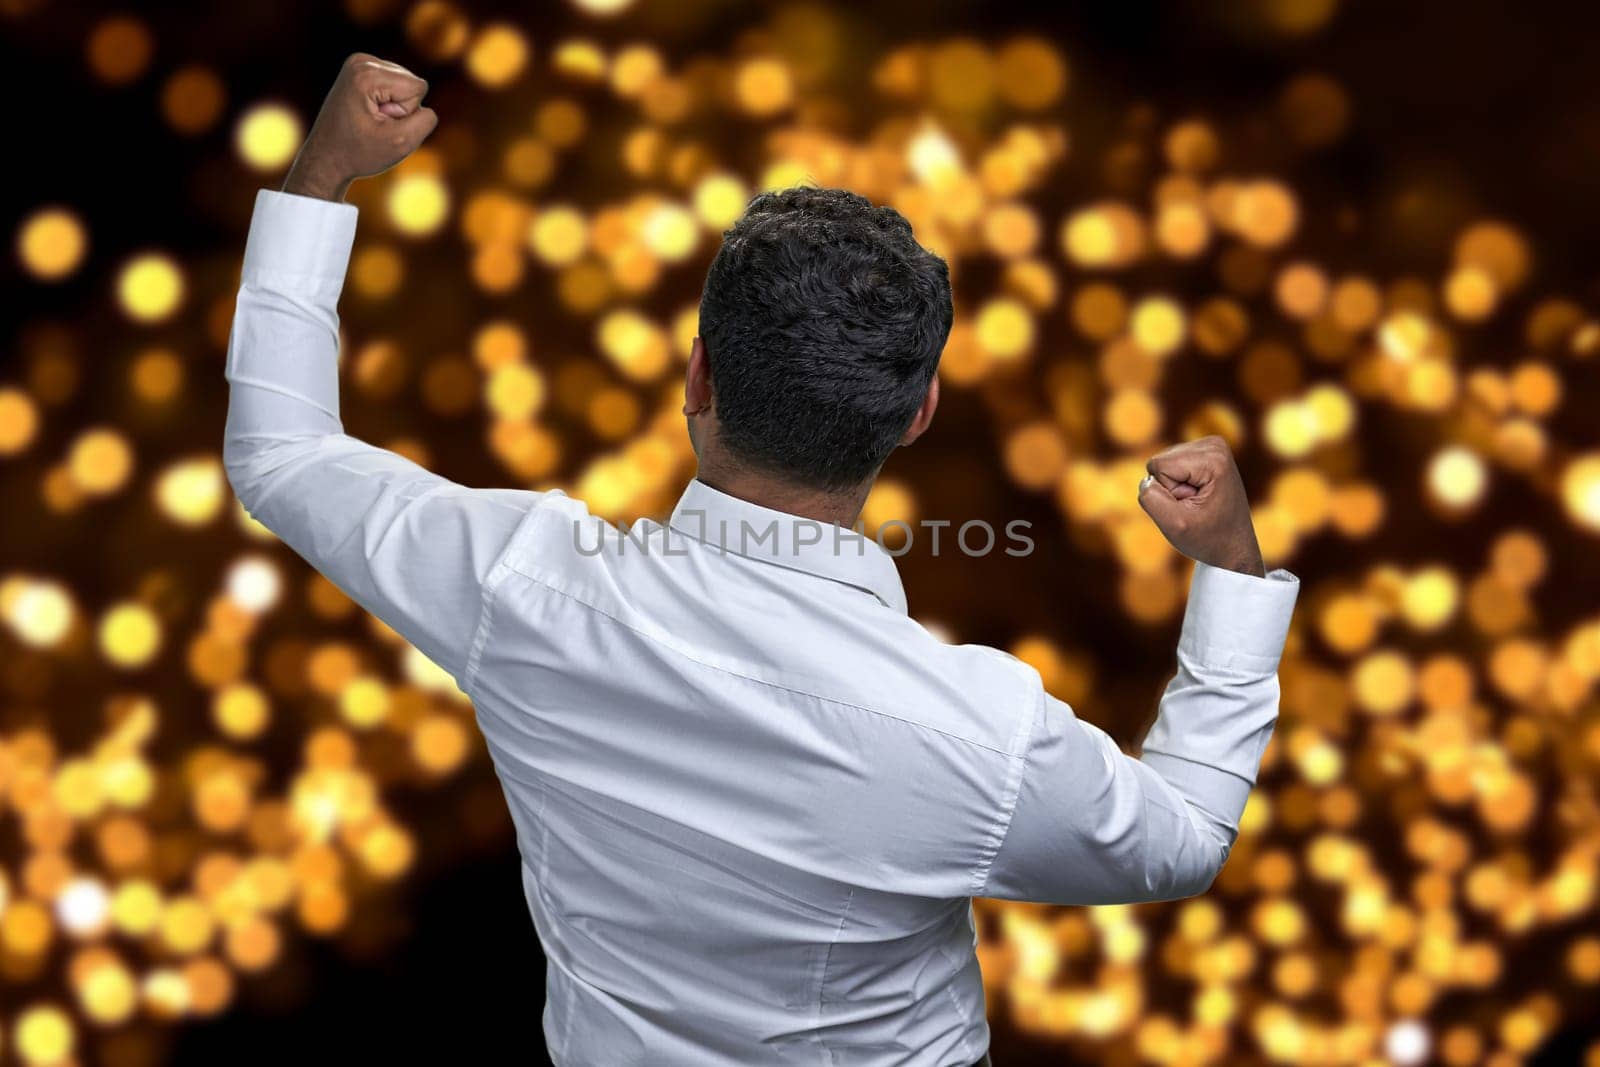 Rear view of successful businessman with clenched fists celebrating goal achievement. Festive bokeh lights in the background.